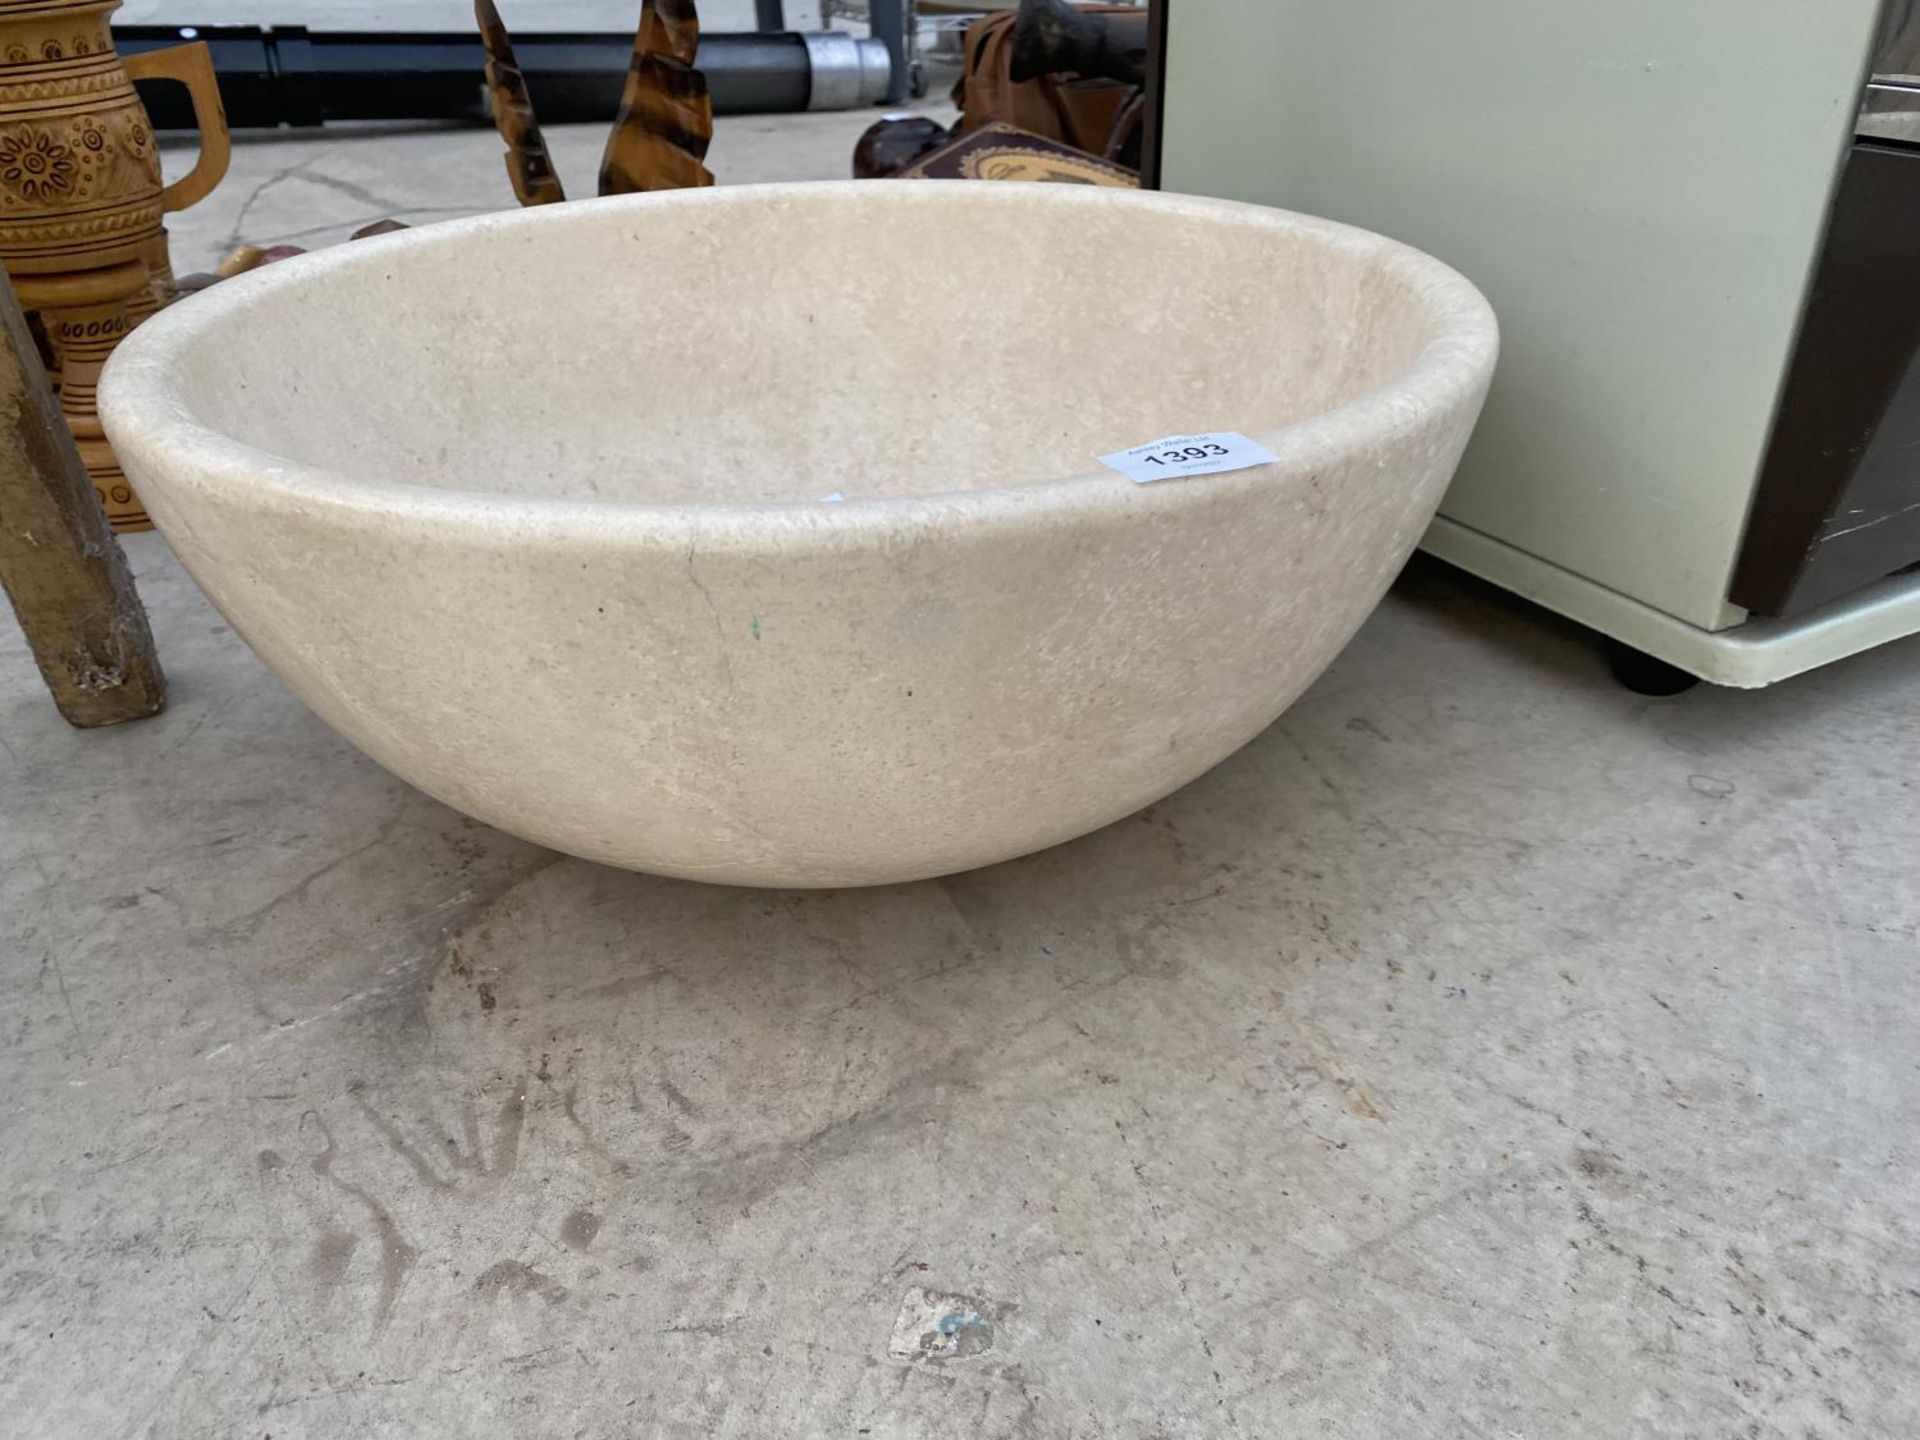 A CREAM WASH BASIN FORMED FROM A PIECE OF MARBLE - Image 2 of 2